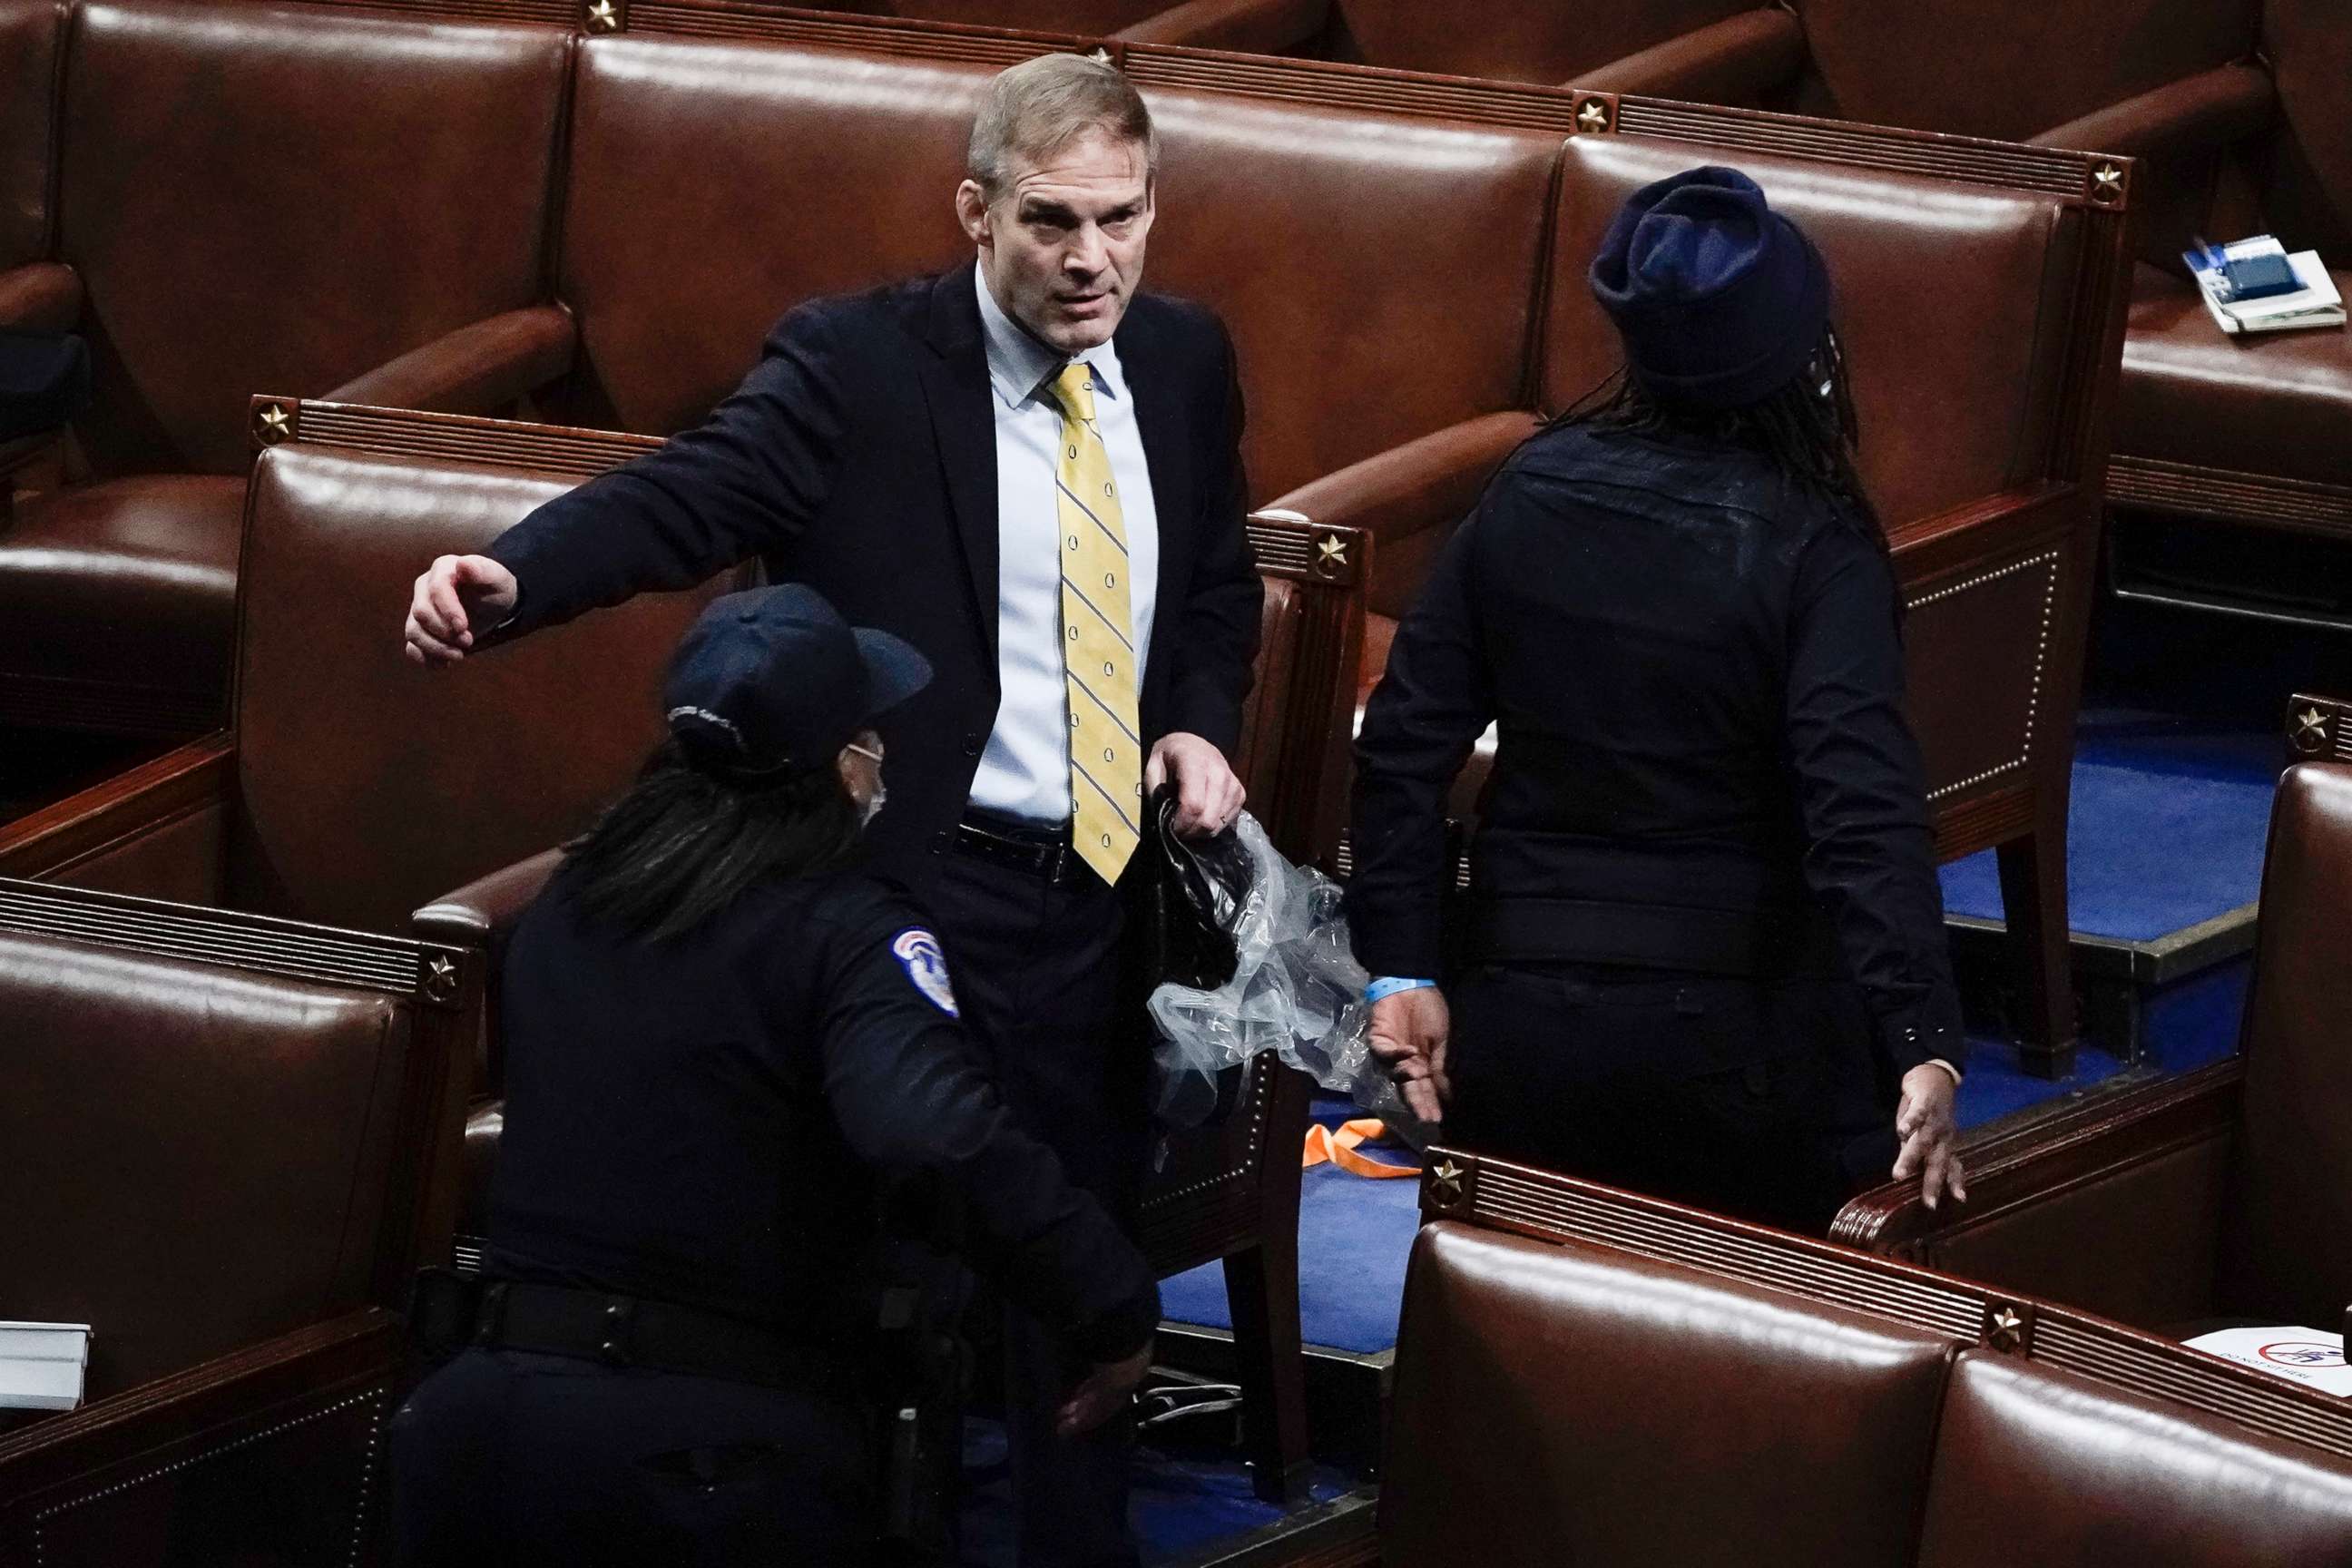 PHOTO: Rep. Jim Jordan, R-Ohio, prepares to evacuate the floor as rioters try to break into the House Chamber at the Capitol, Jan. 6, 2021.